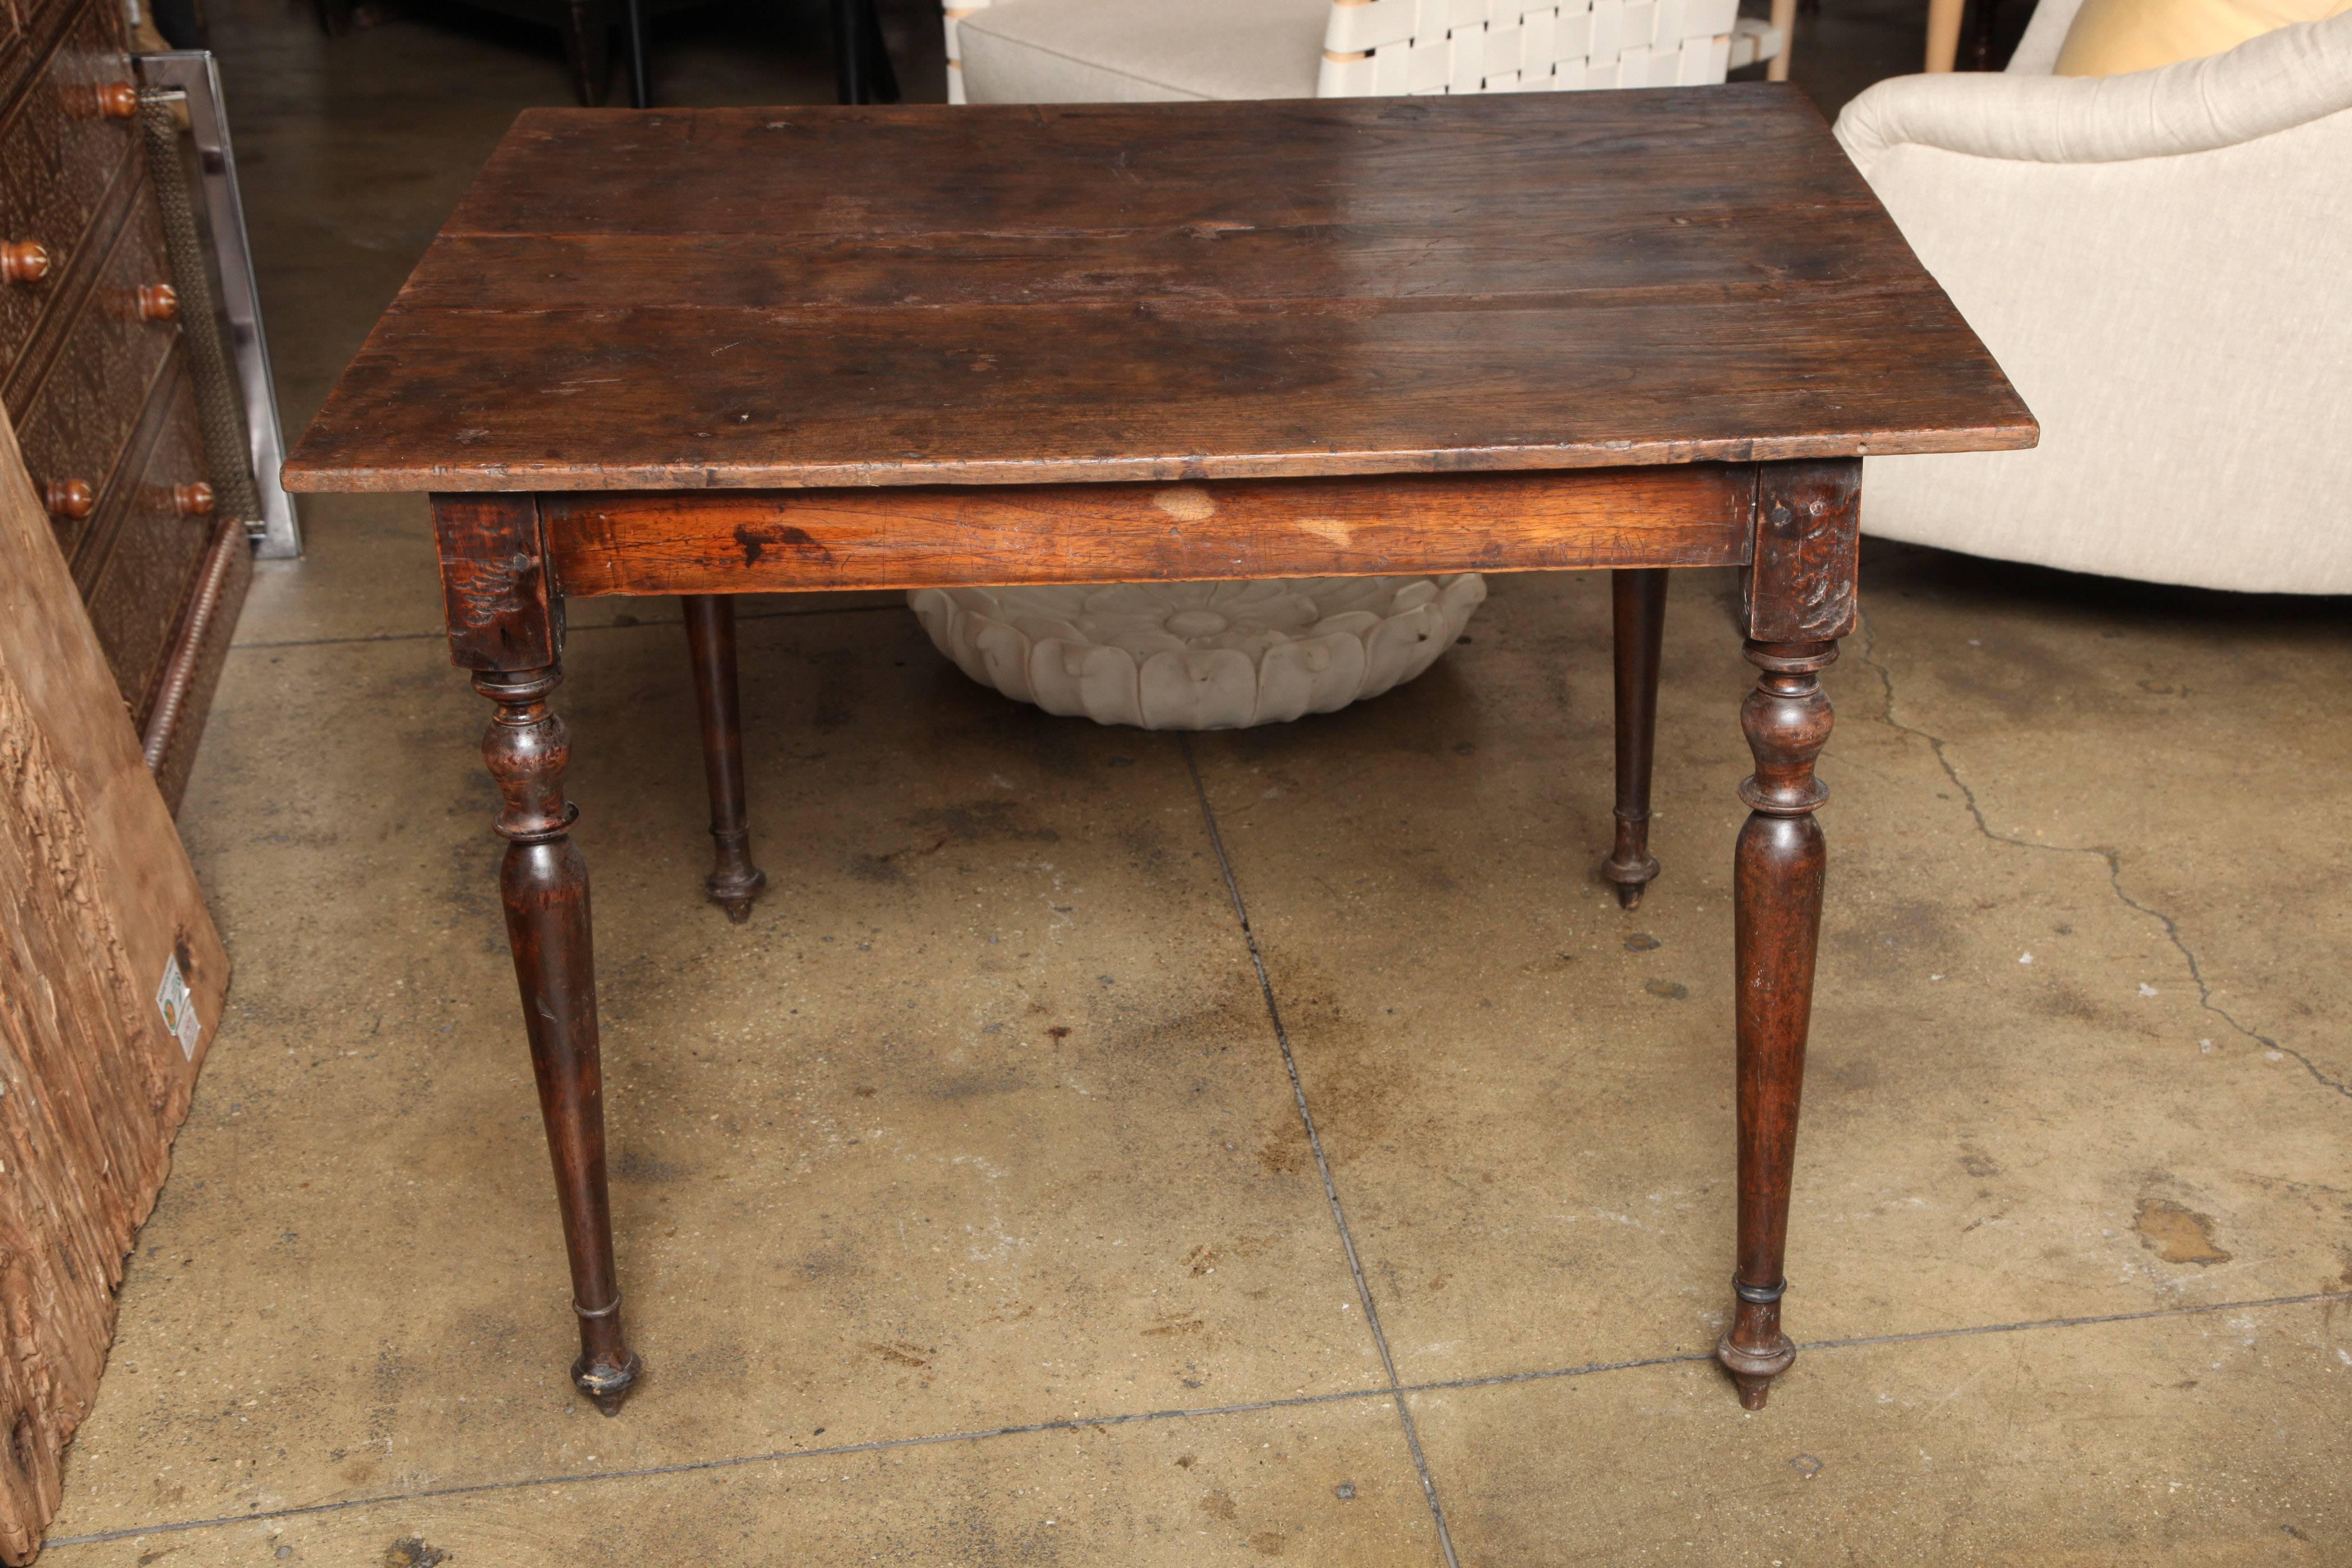 Hand-Carved Dutch Colonial Teak Wood Table from Indonesia, Early 20th Century